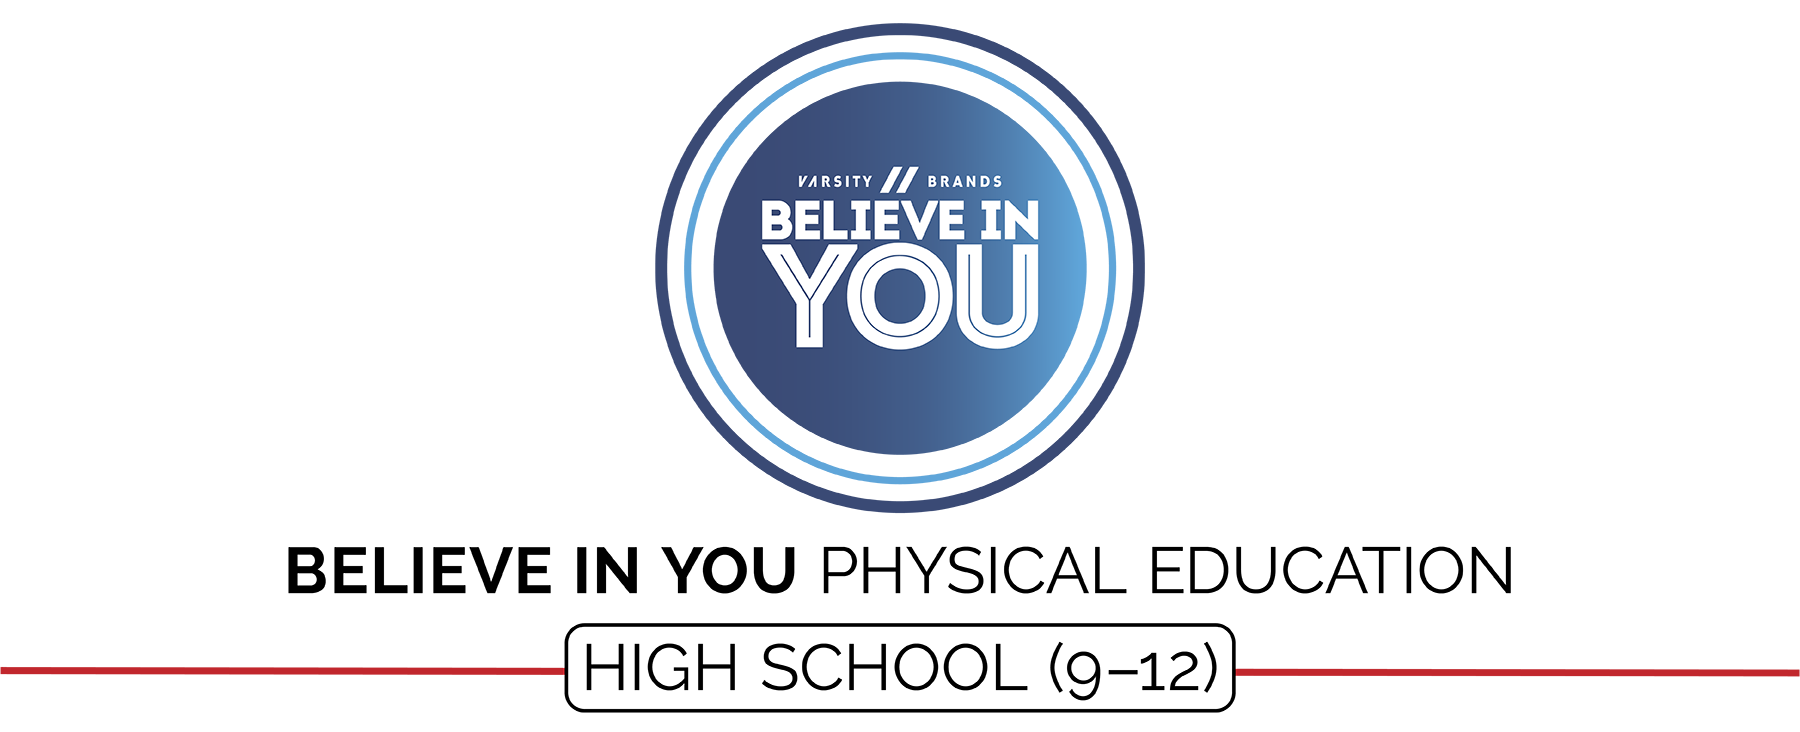 Believe In You (High School) - OPEN Physical Education Curriculum